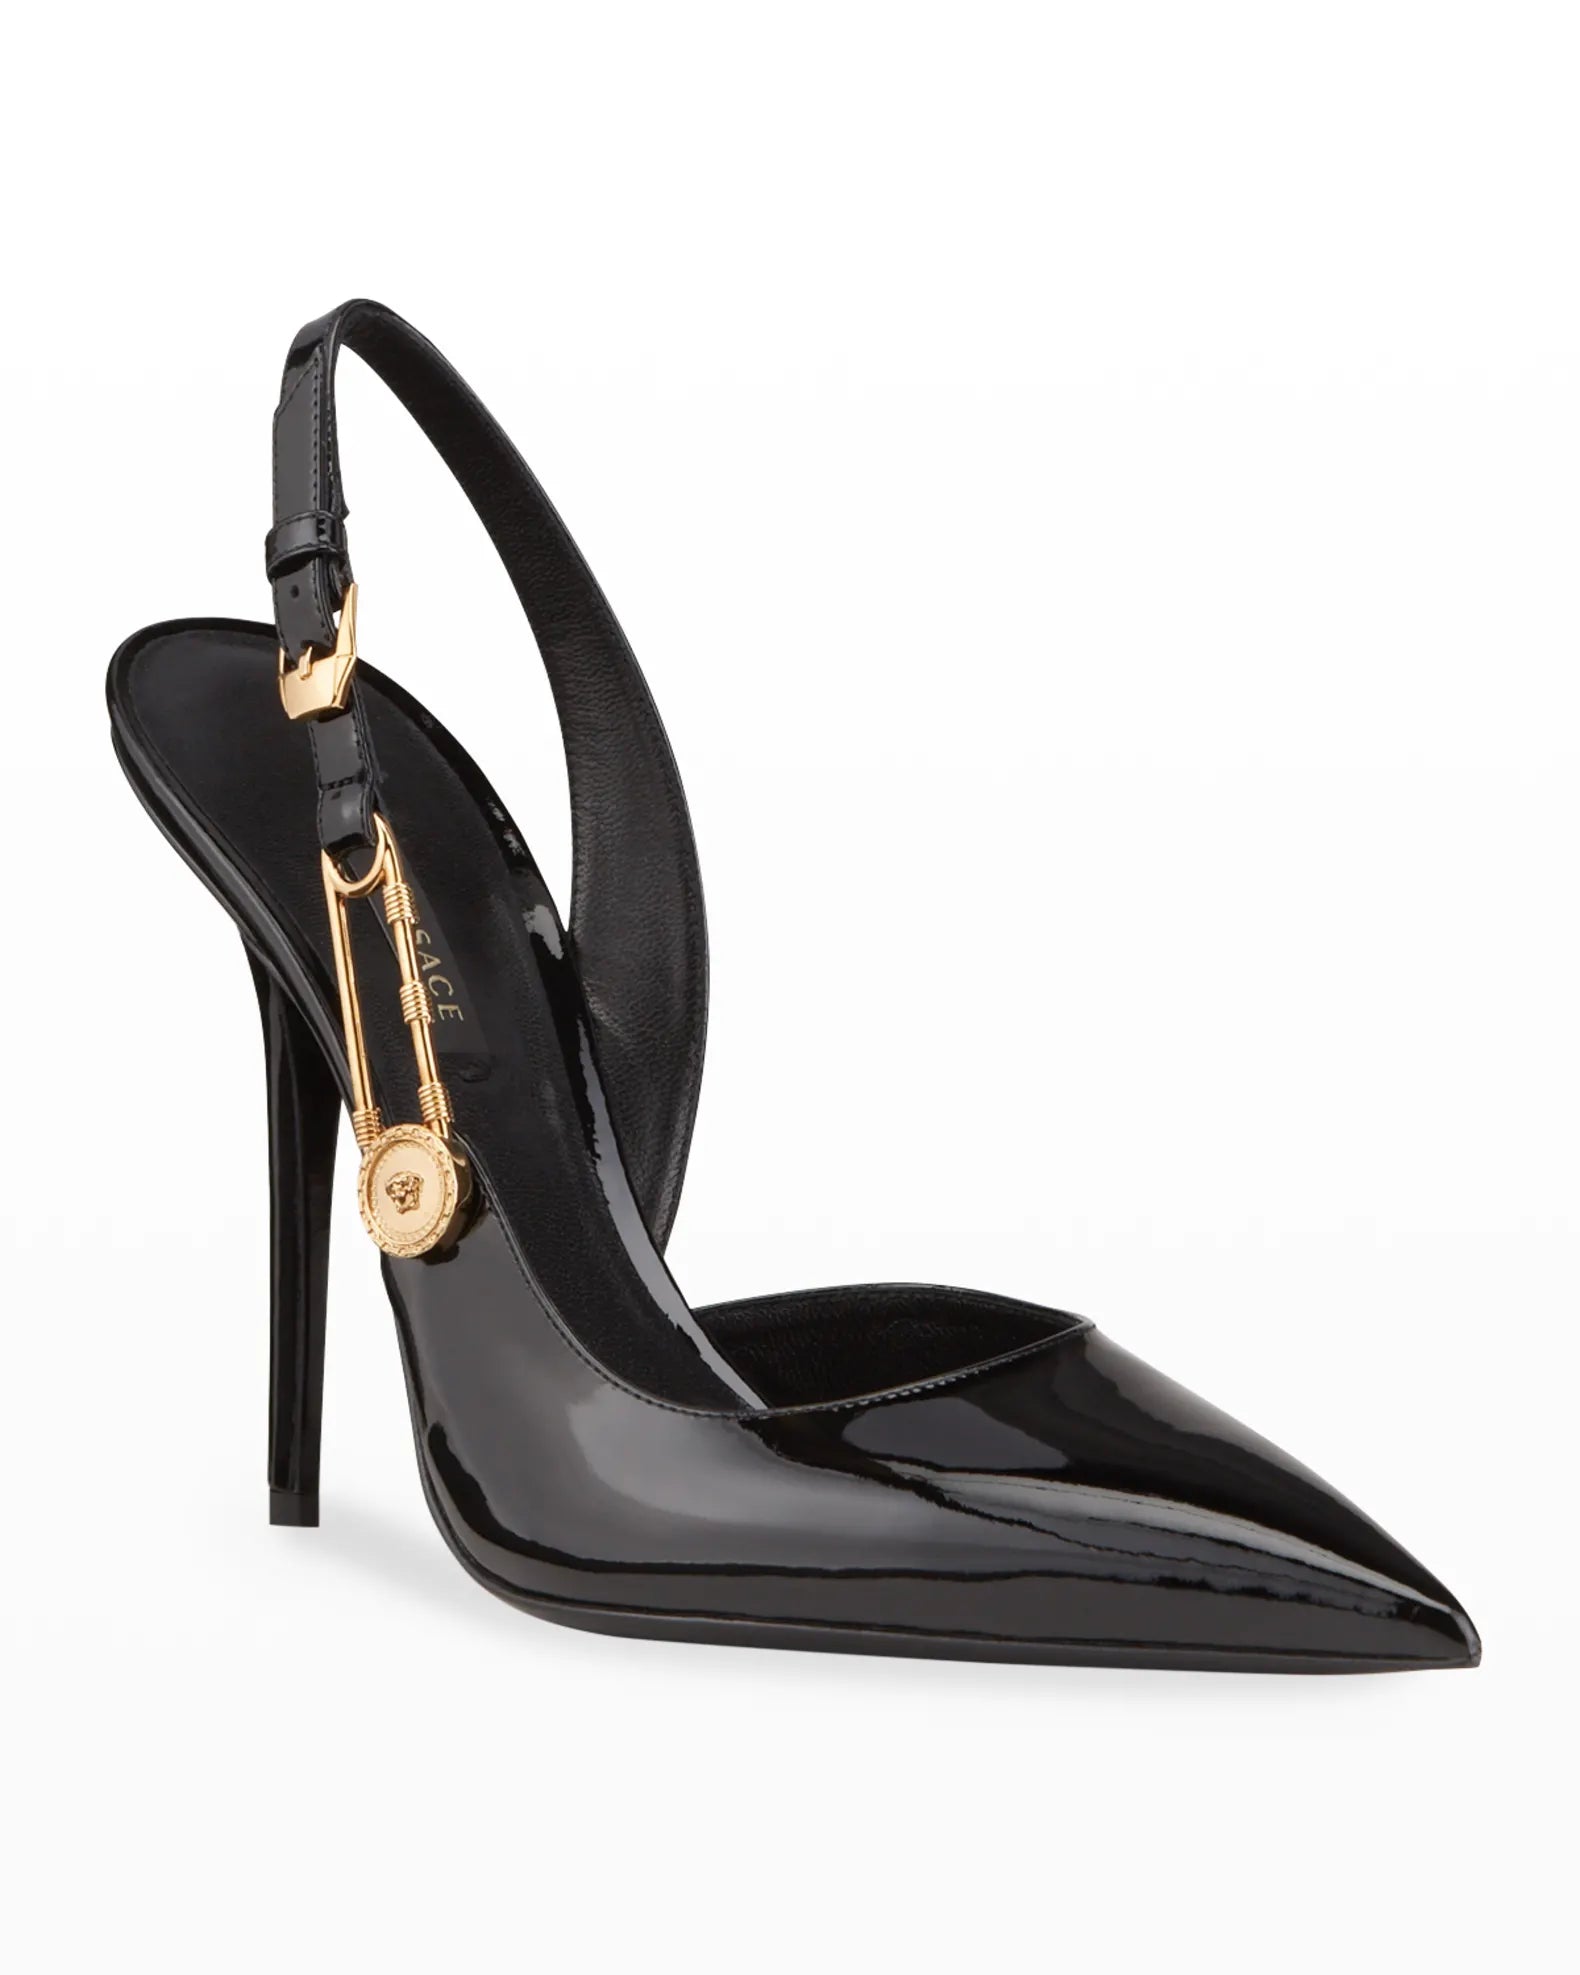 VERSACE SAFETY PIN HEELS